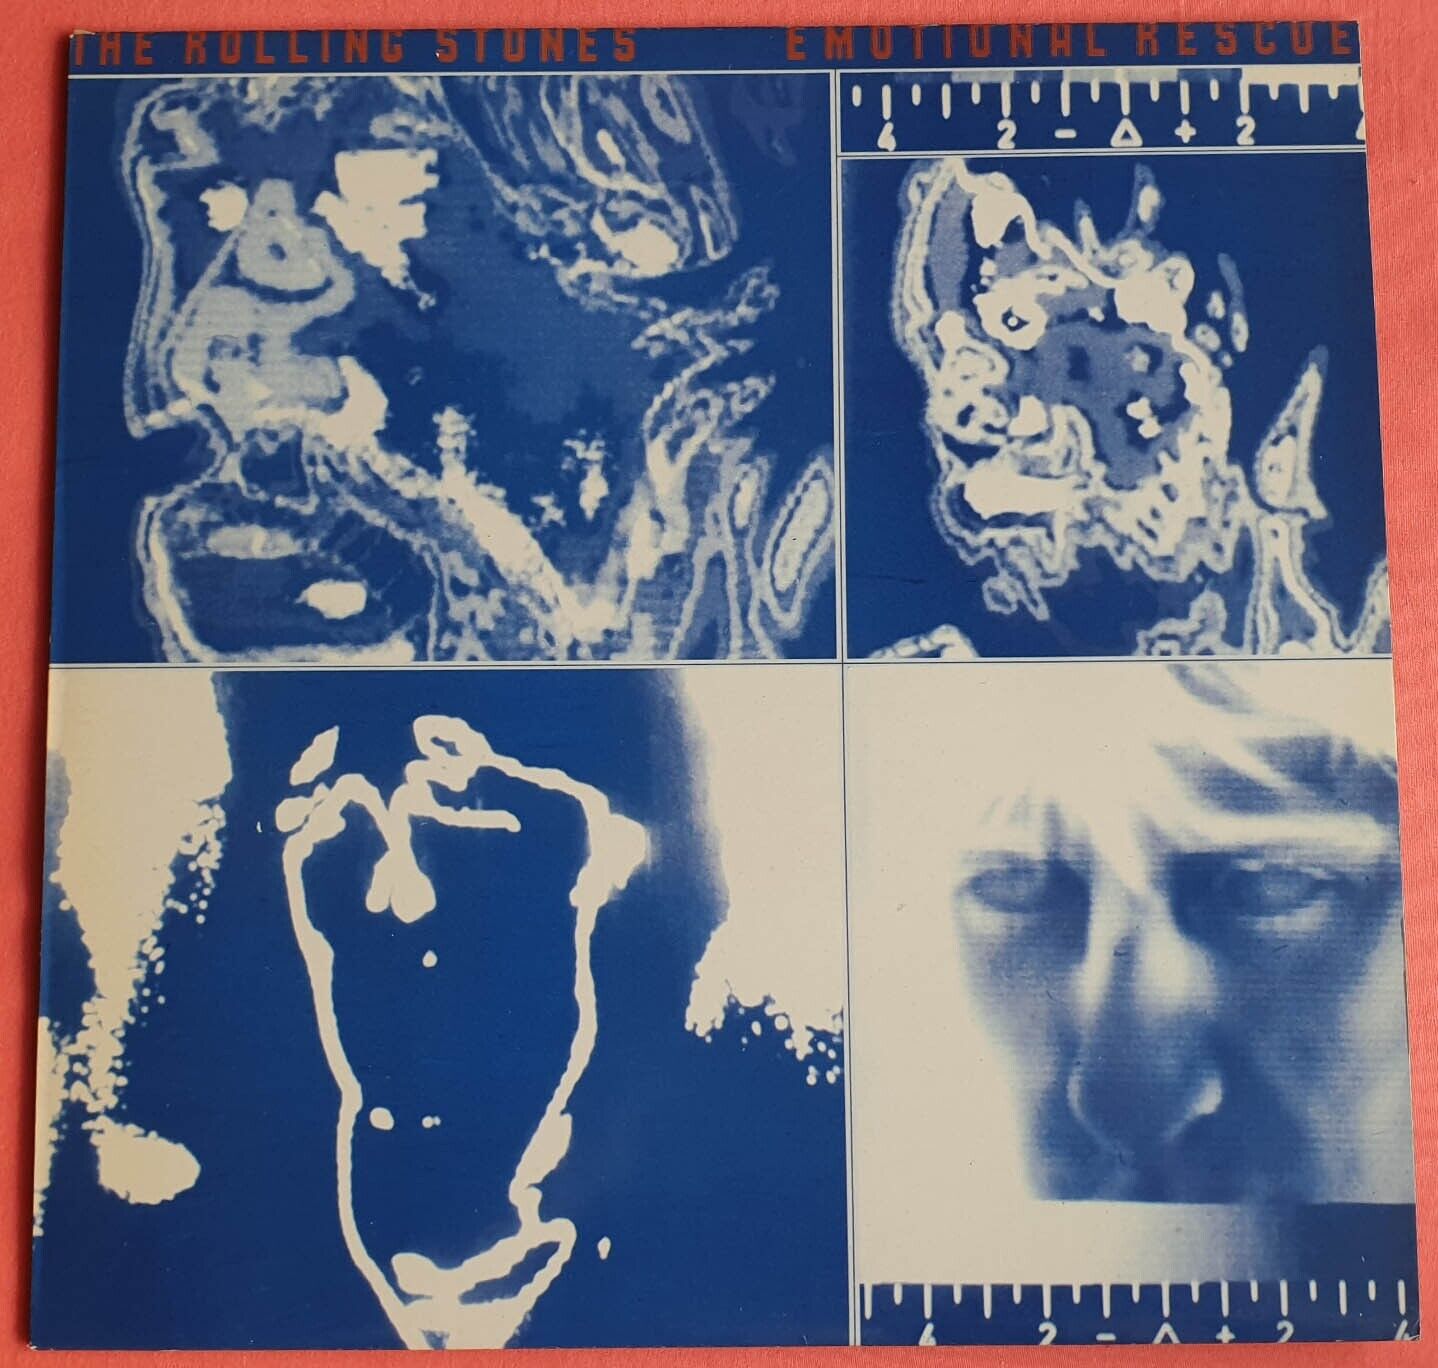 The Rolling Stones-Emotional Rescue LP Greece Send It to Me, She's So Cold NM